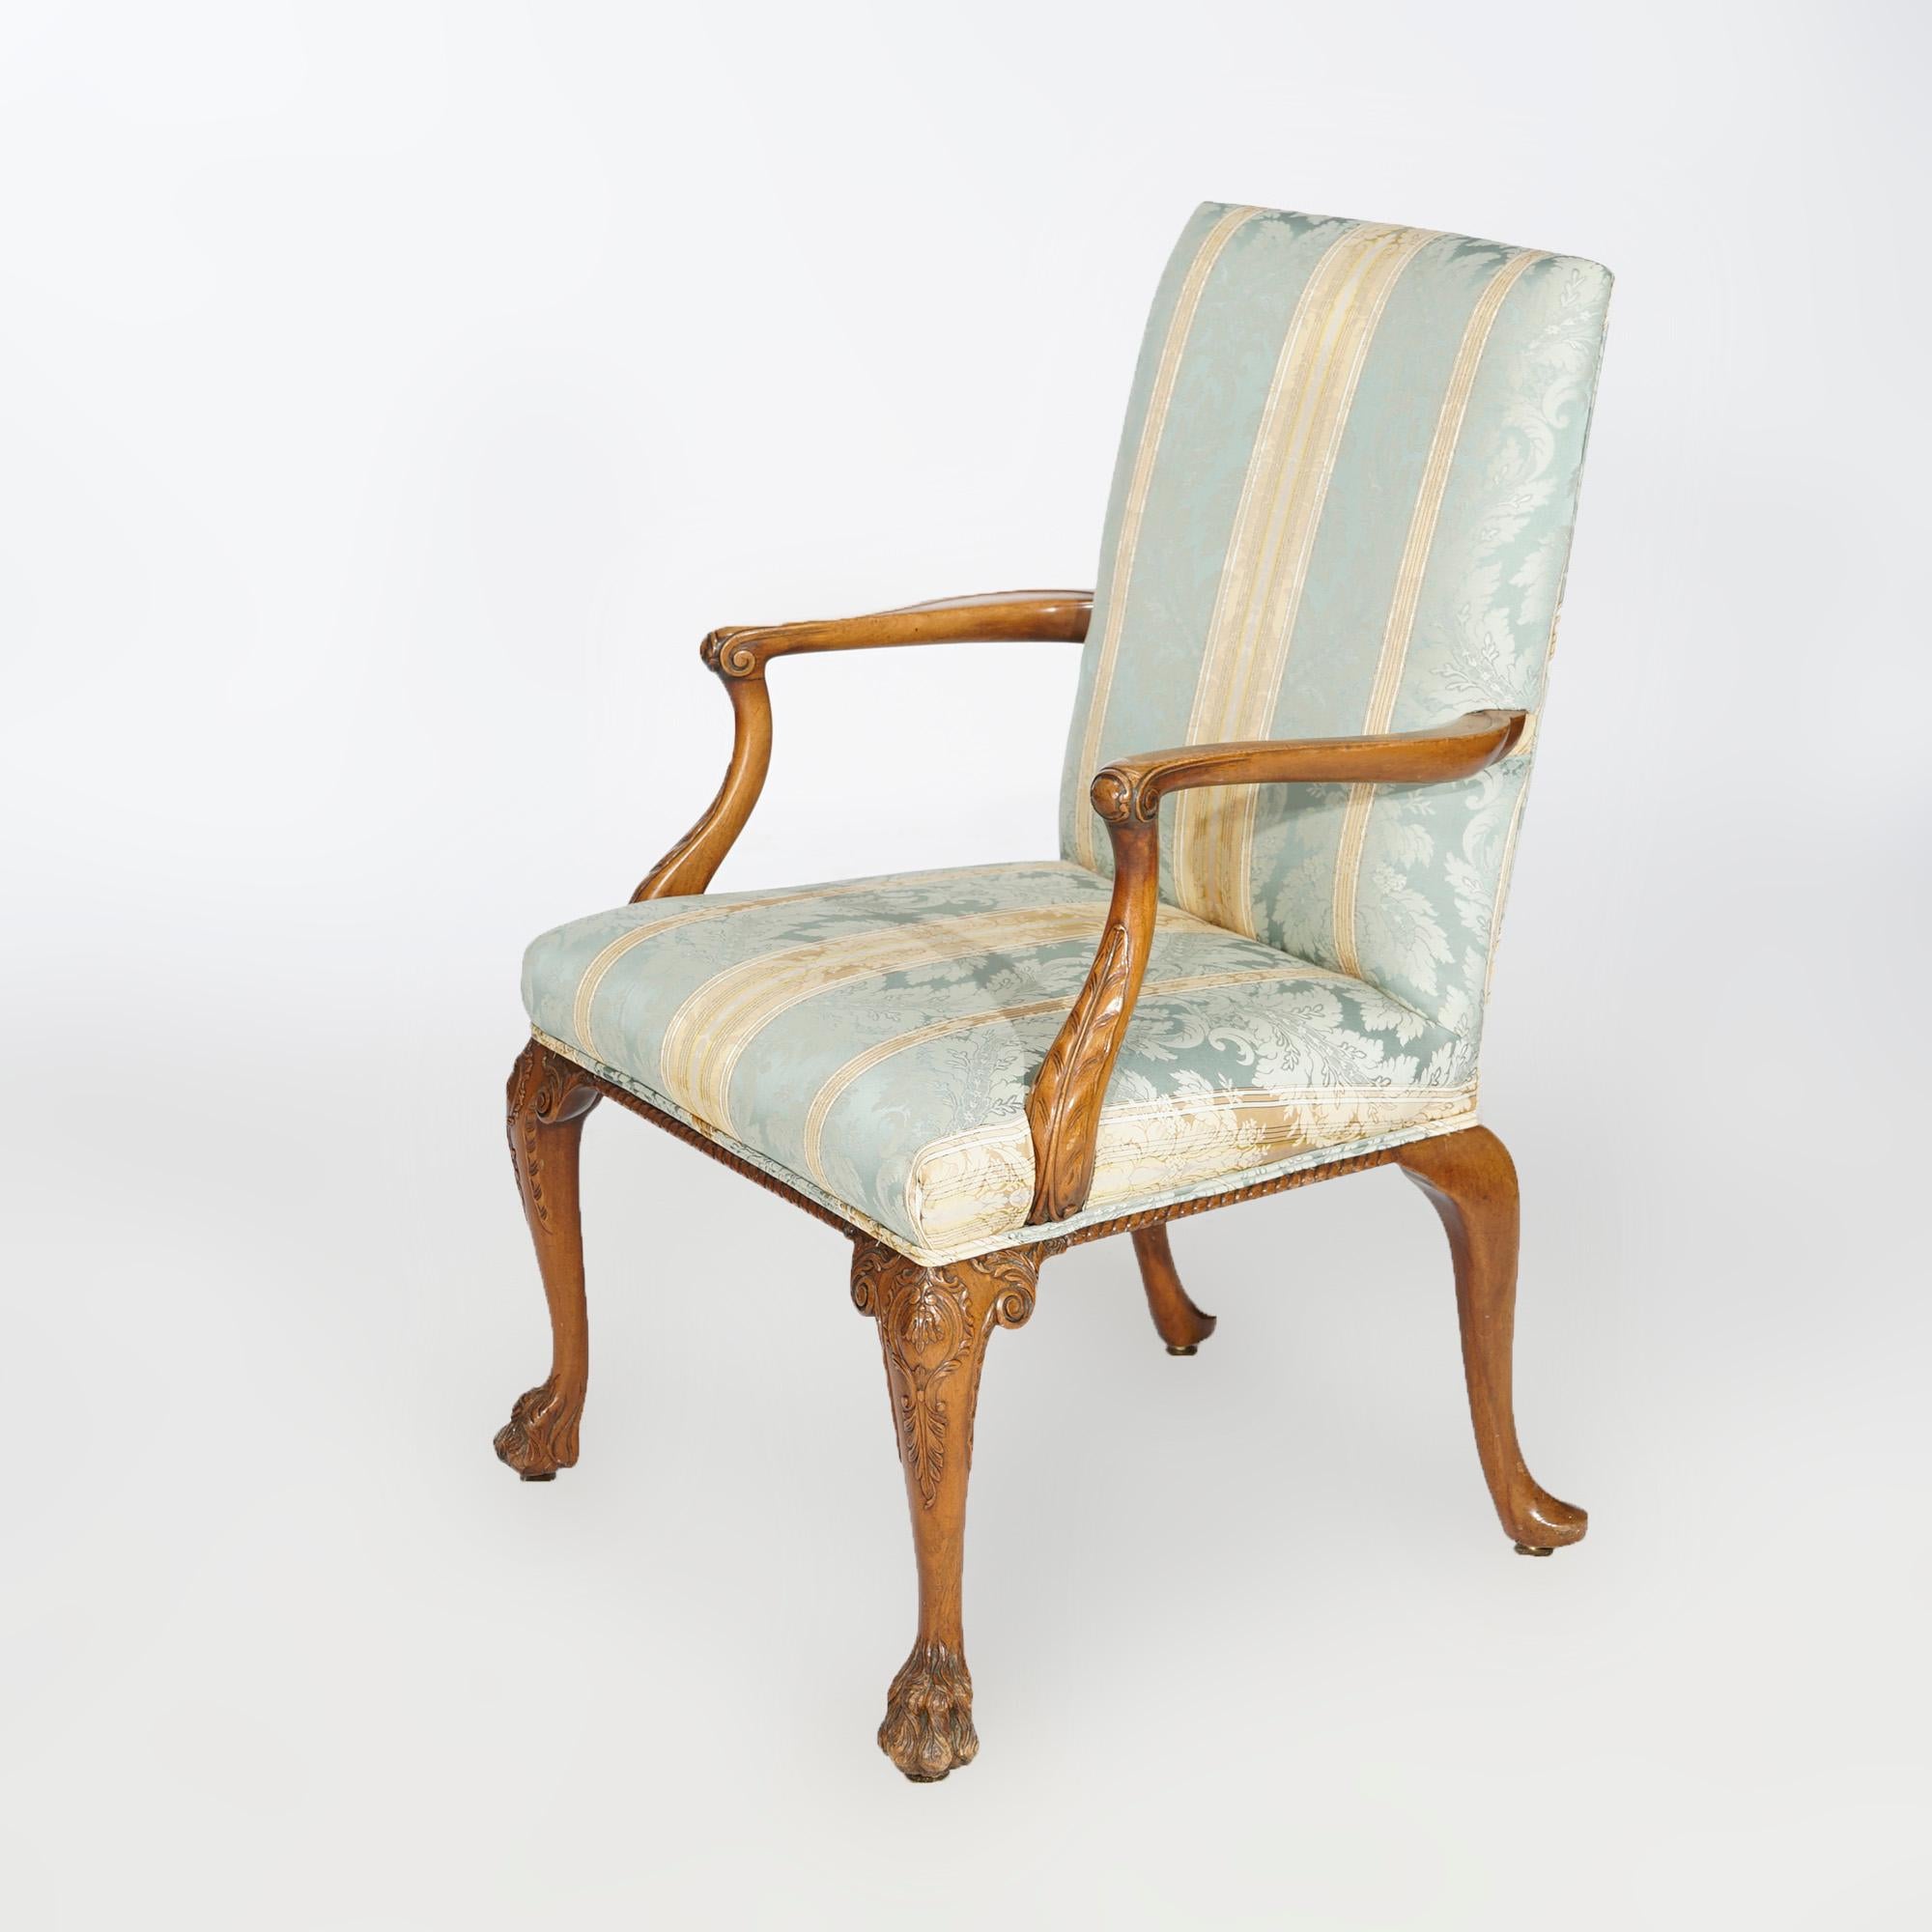 Antique English Walnut Upholstered Lolling Chair 19th C 2